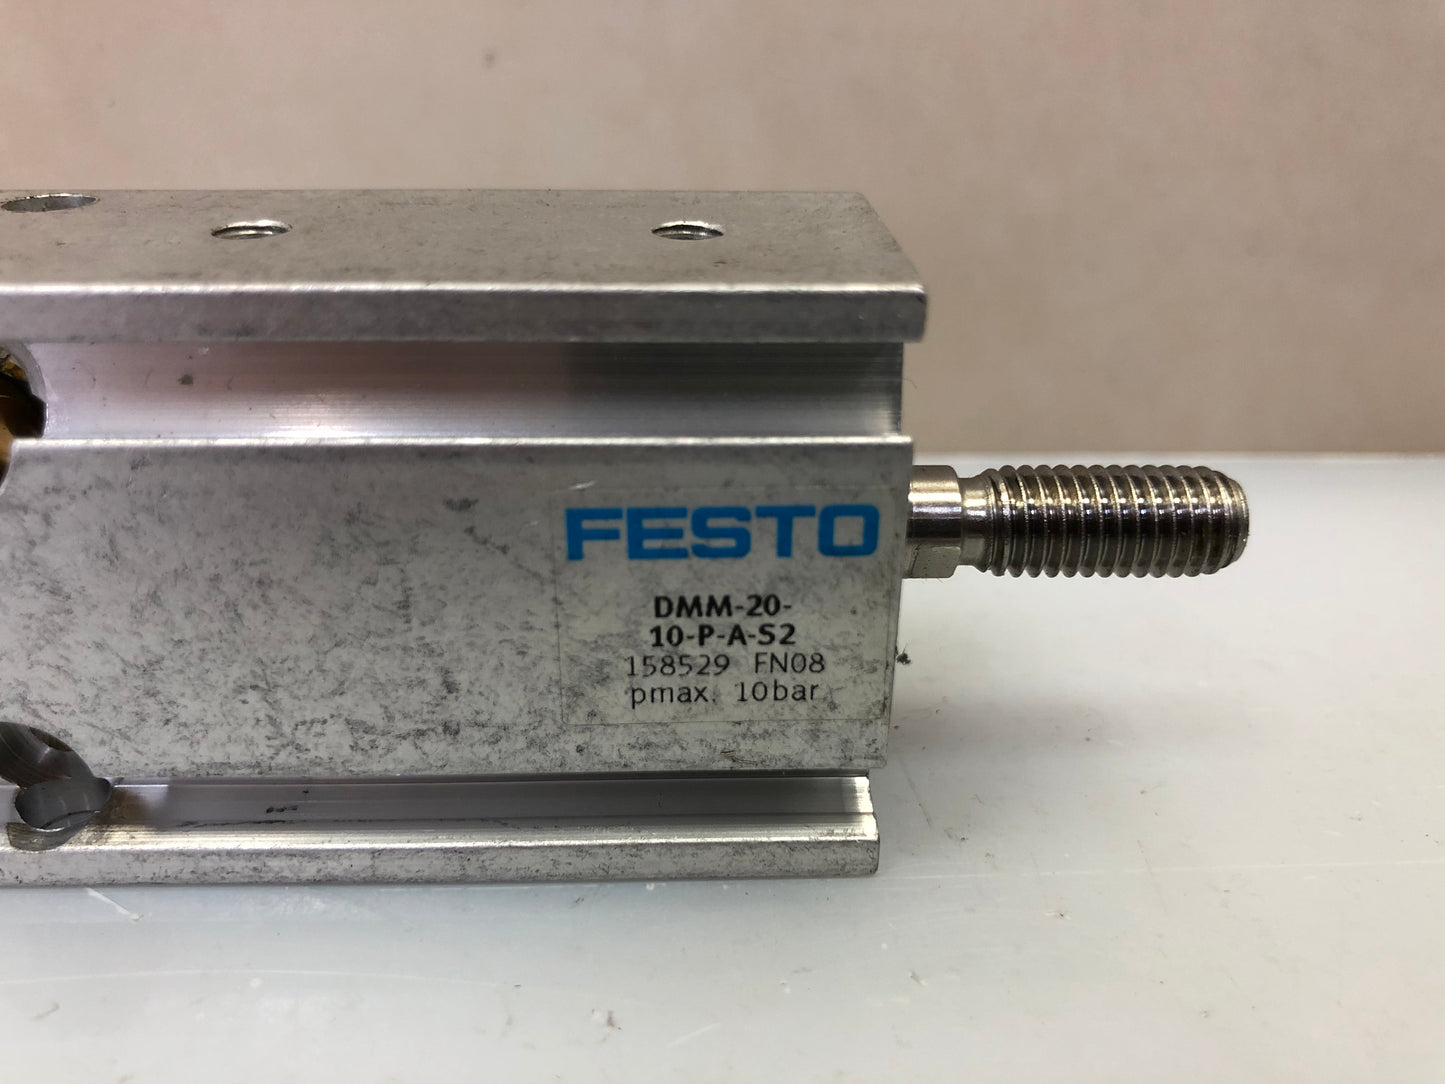 Festo Air Pneumatic Twin Rod Cylinder DMM-20-10-P-A-S2 158529